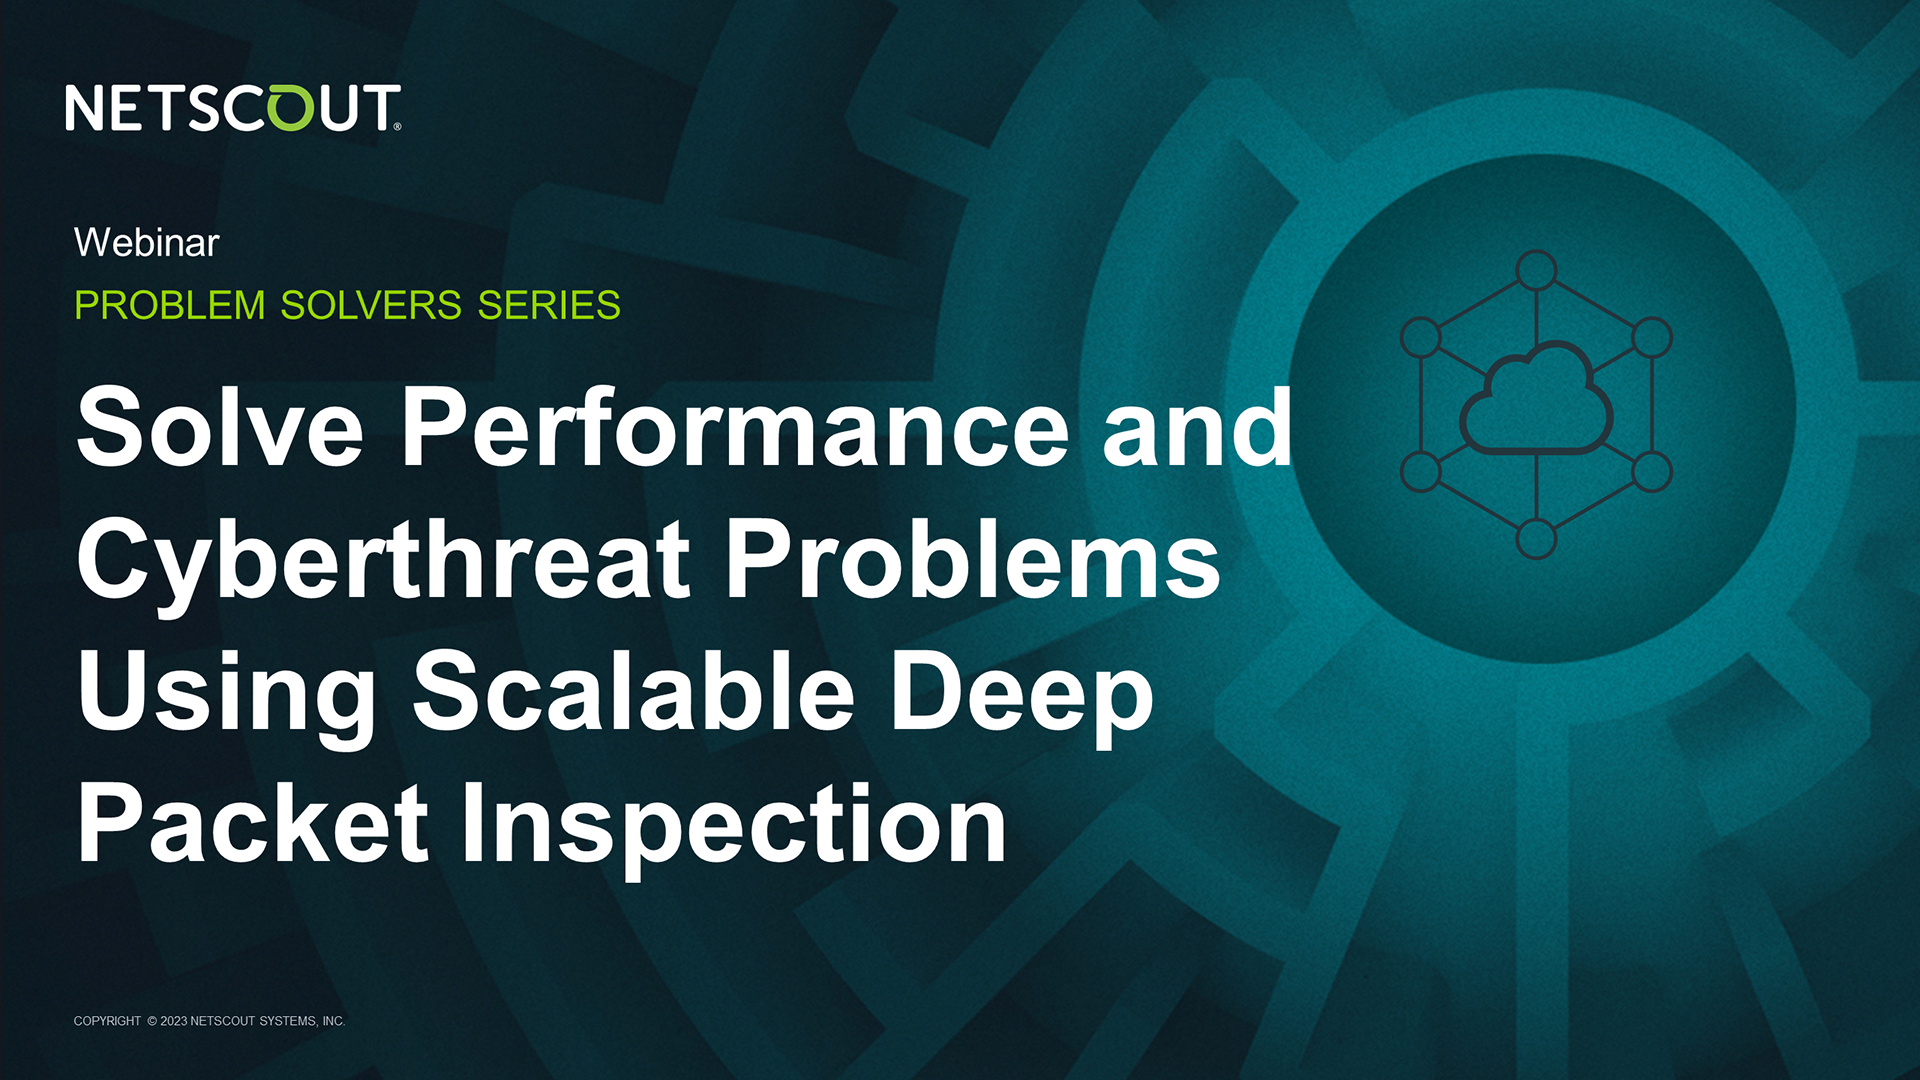 Solve Performance and Cyberthreat Problems using Scalable Deep Packet Inspection